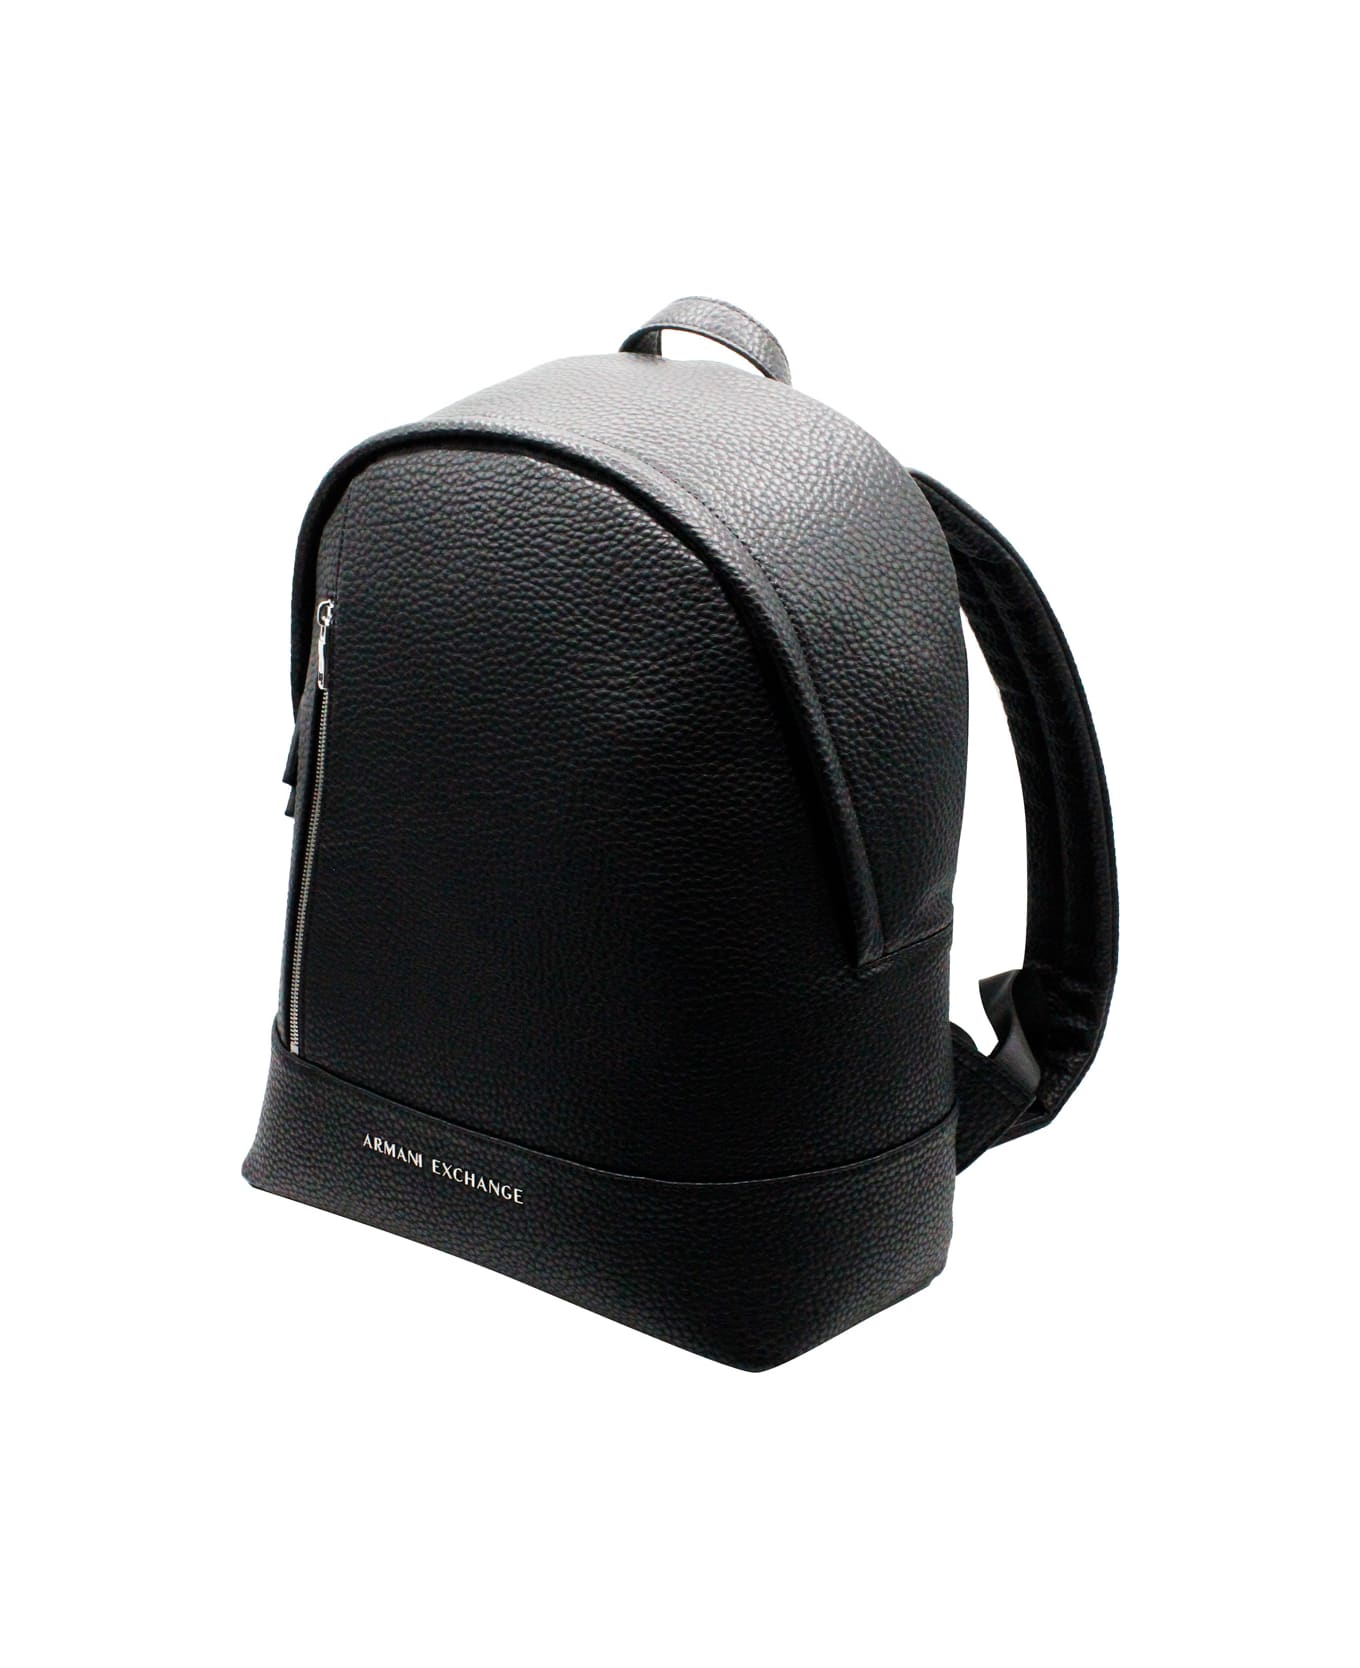 Armani Collezioni Backpack In Very Soft Soft Grain Eco-leather With Logo On The Front. Adjustable Shoulder Straps. Measures 38x32x12 Cm - Black